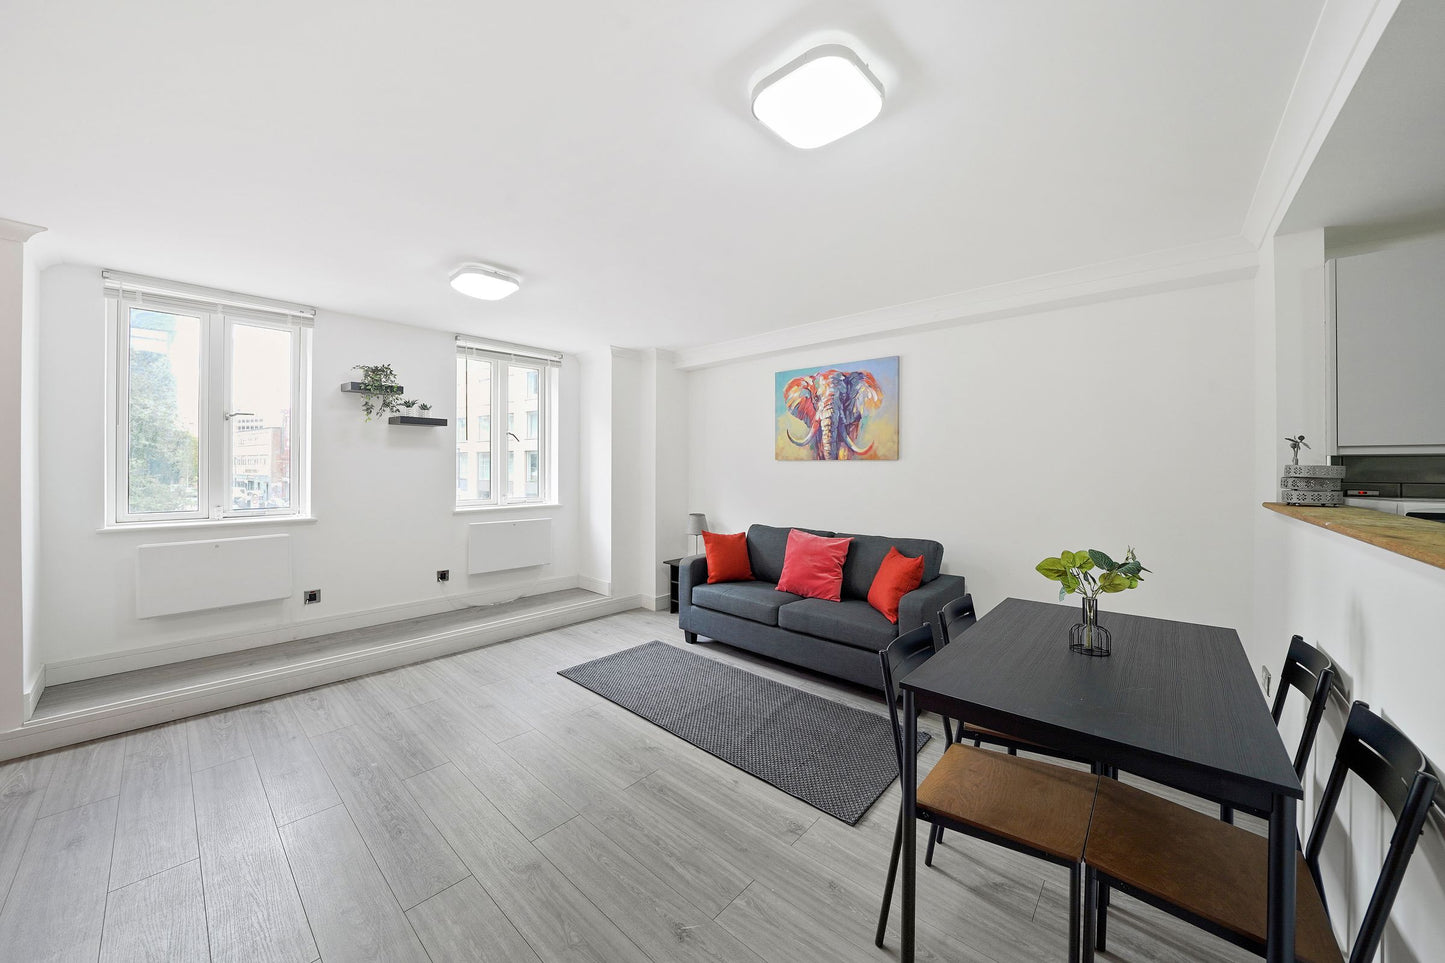 The Aldgate East Residency